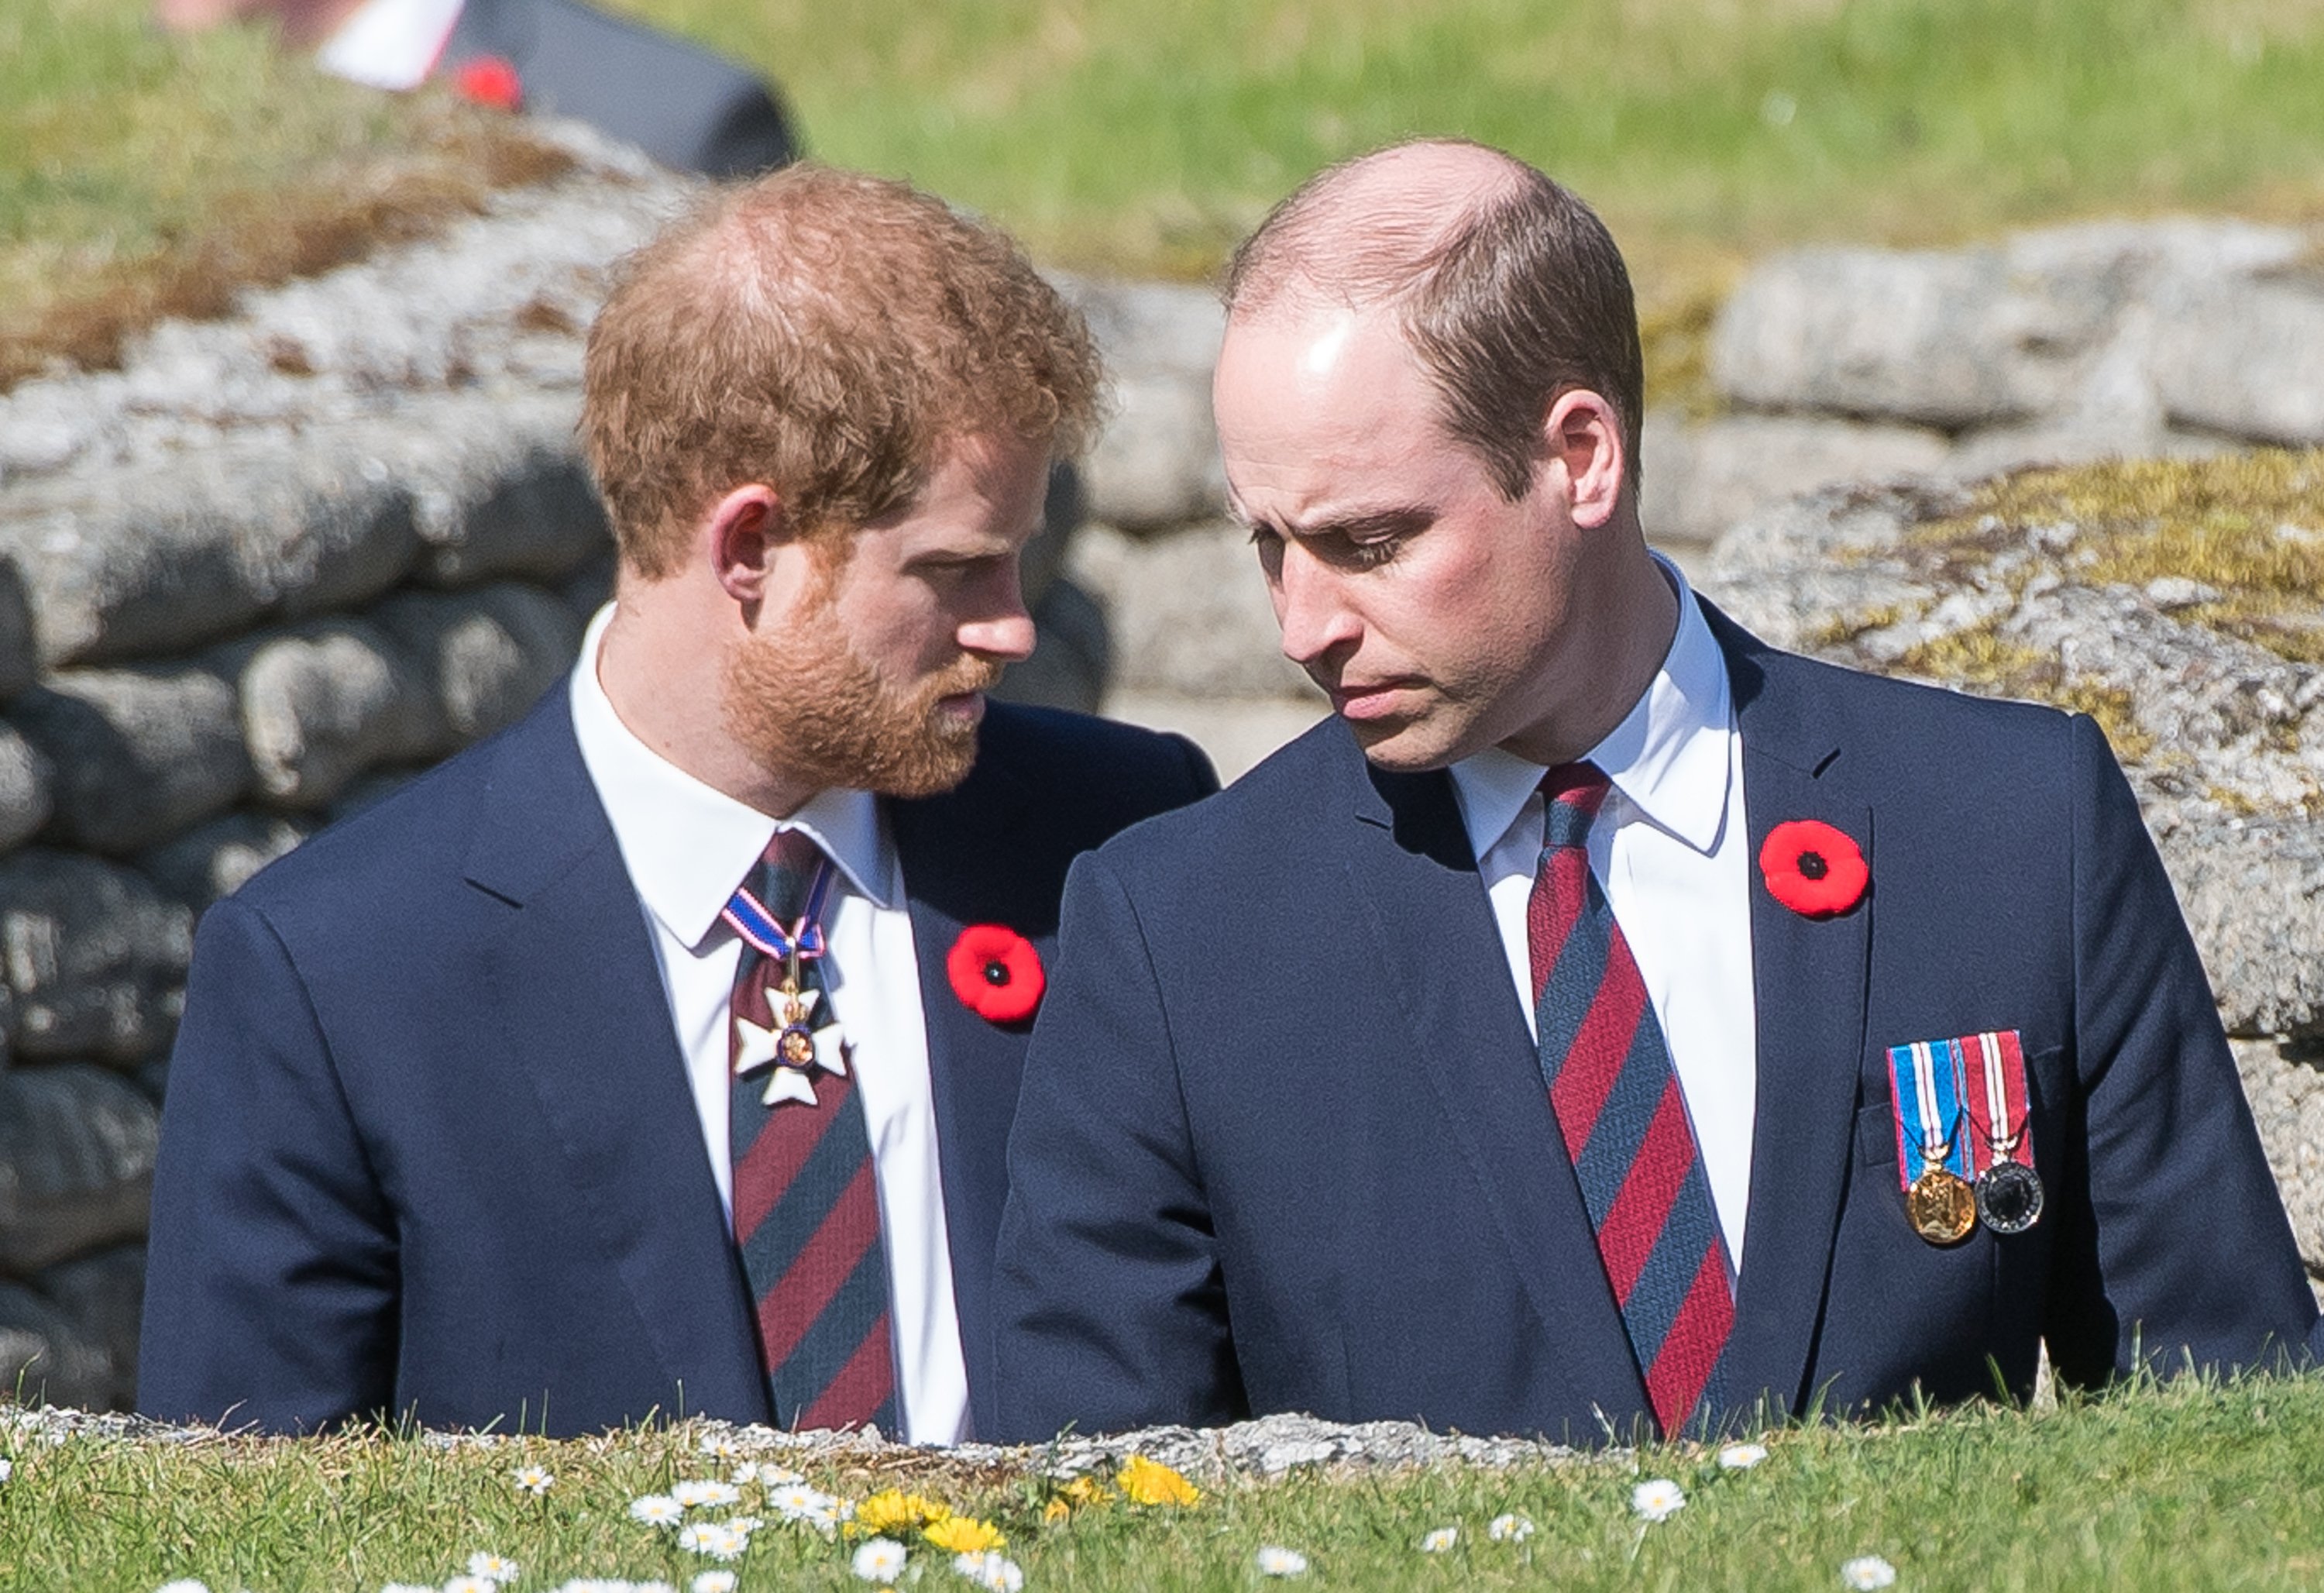 Prince William and Prince Harry at the commemorations for the 100th anniversary of the battle of Vimy Ridge on April 9, 2017 in Lille, France. | Source: Getty Images